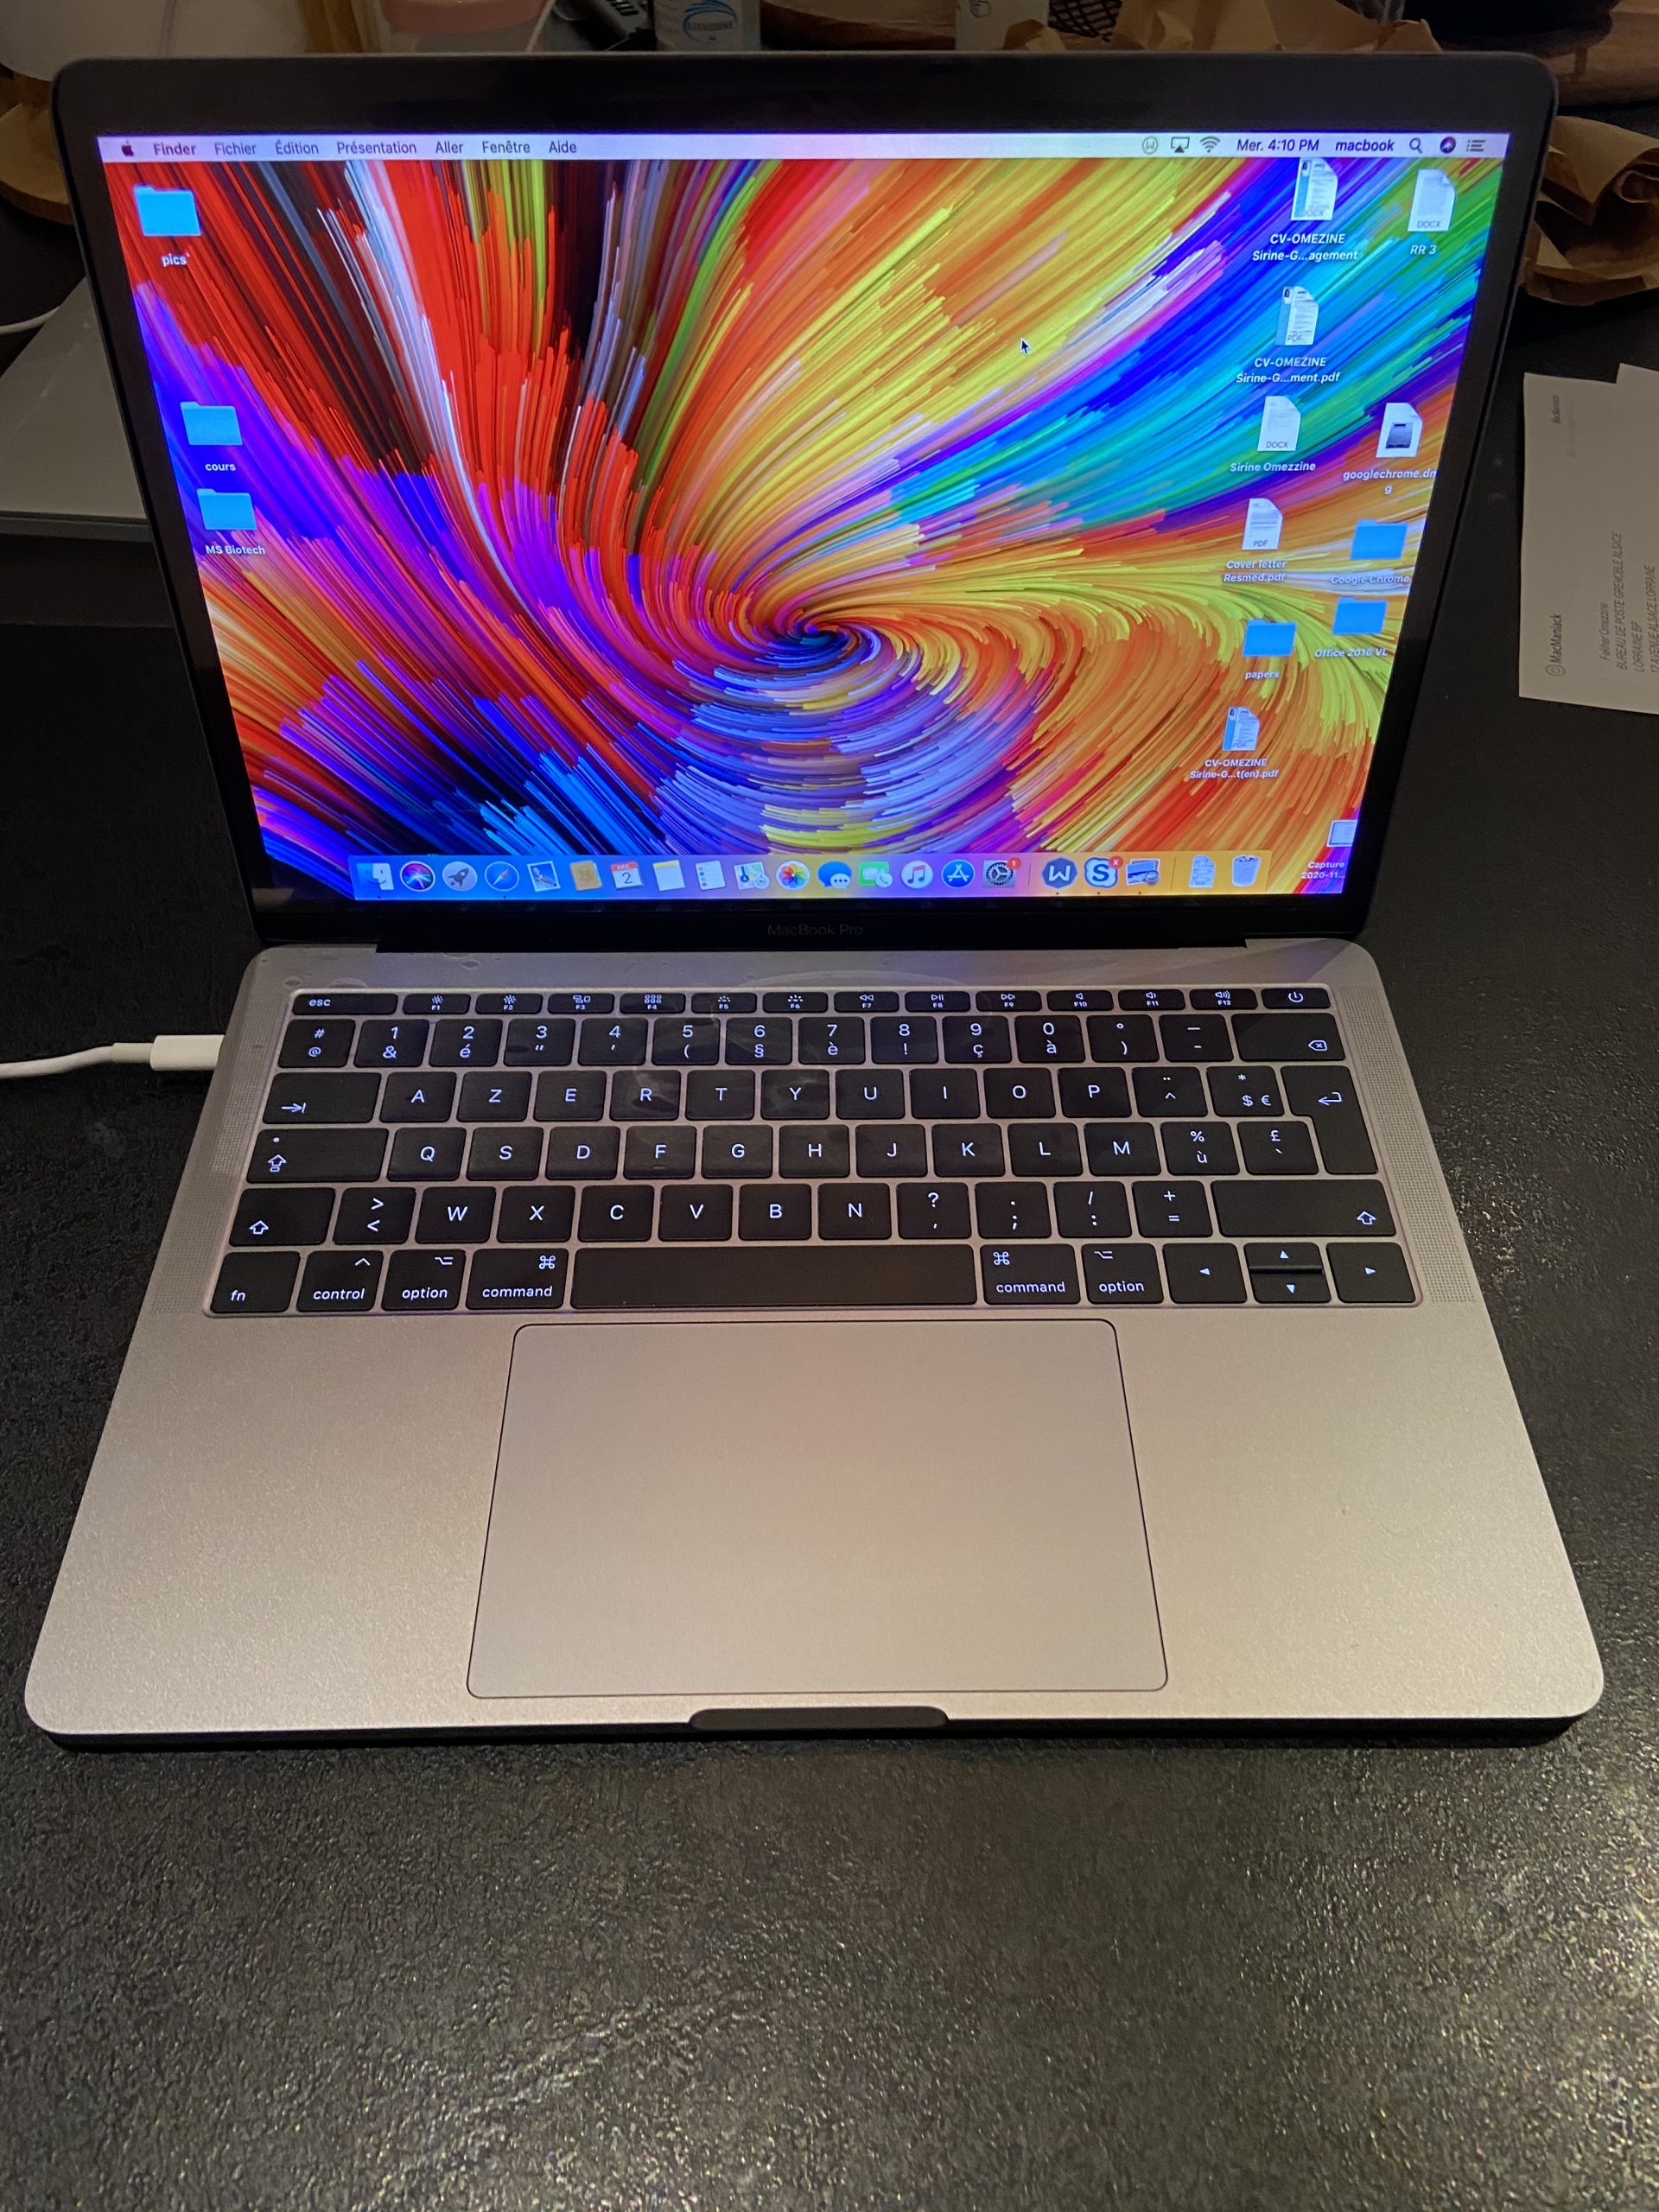 MacBook Pro: This MacBook Pro is now considered a 'vintage